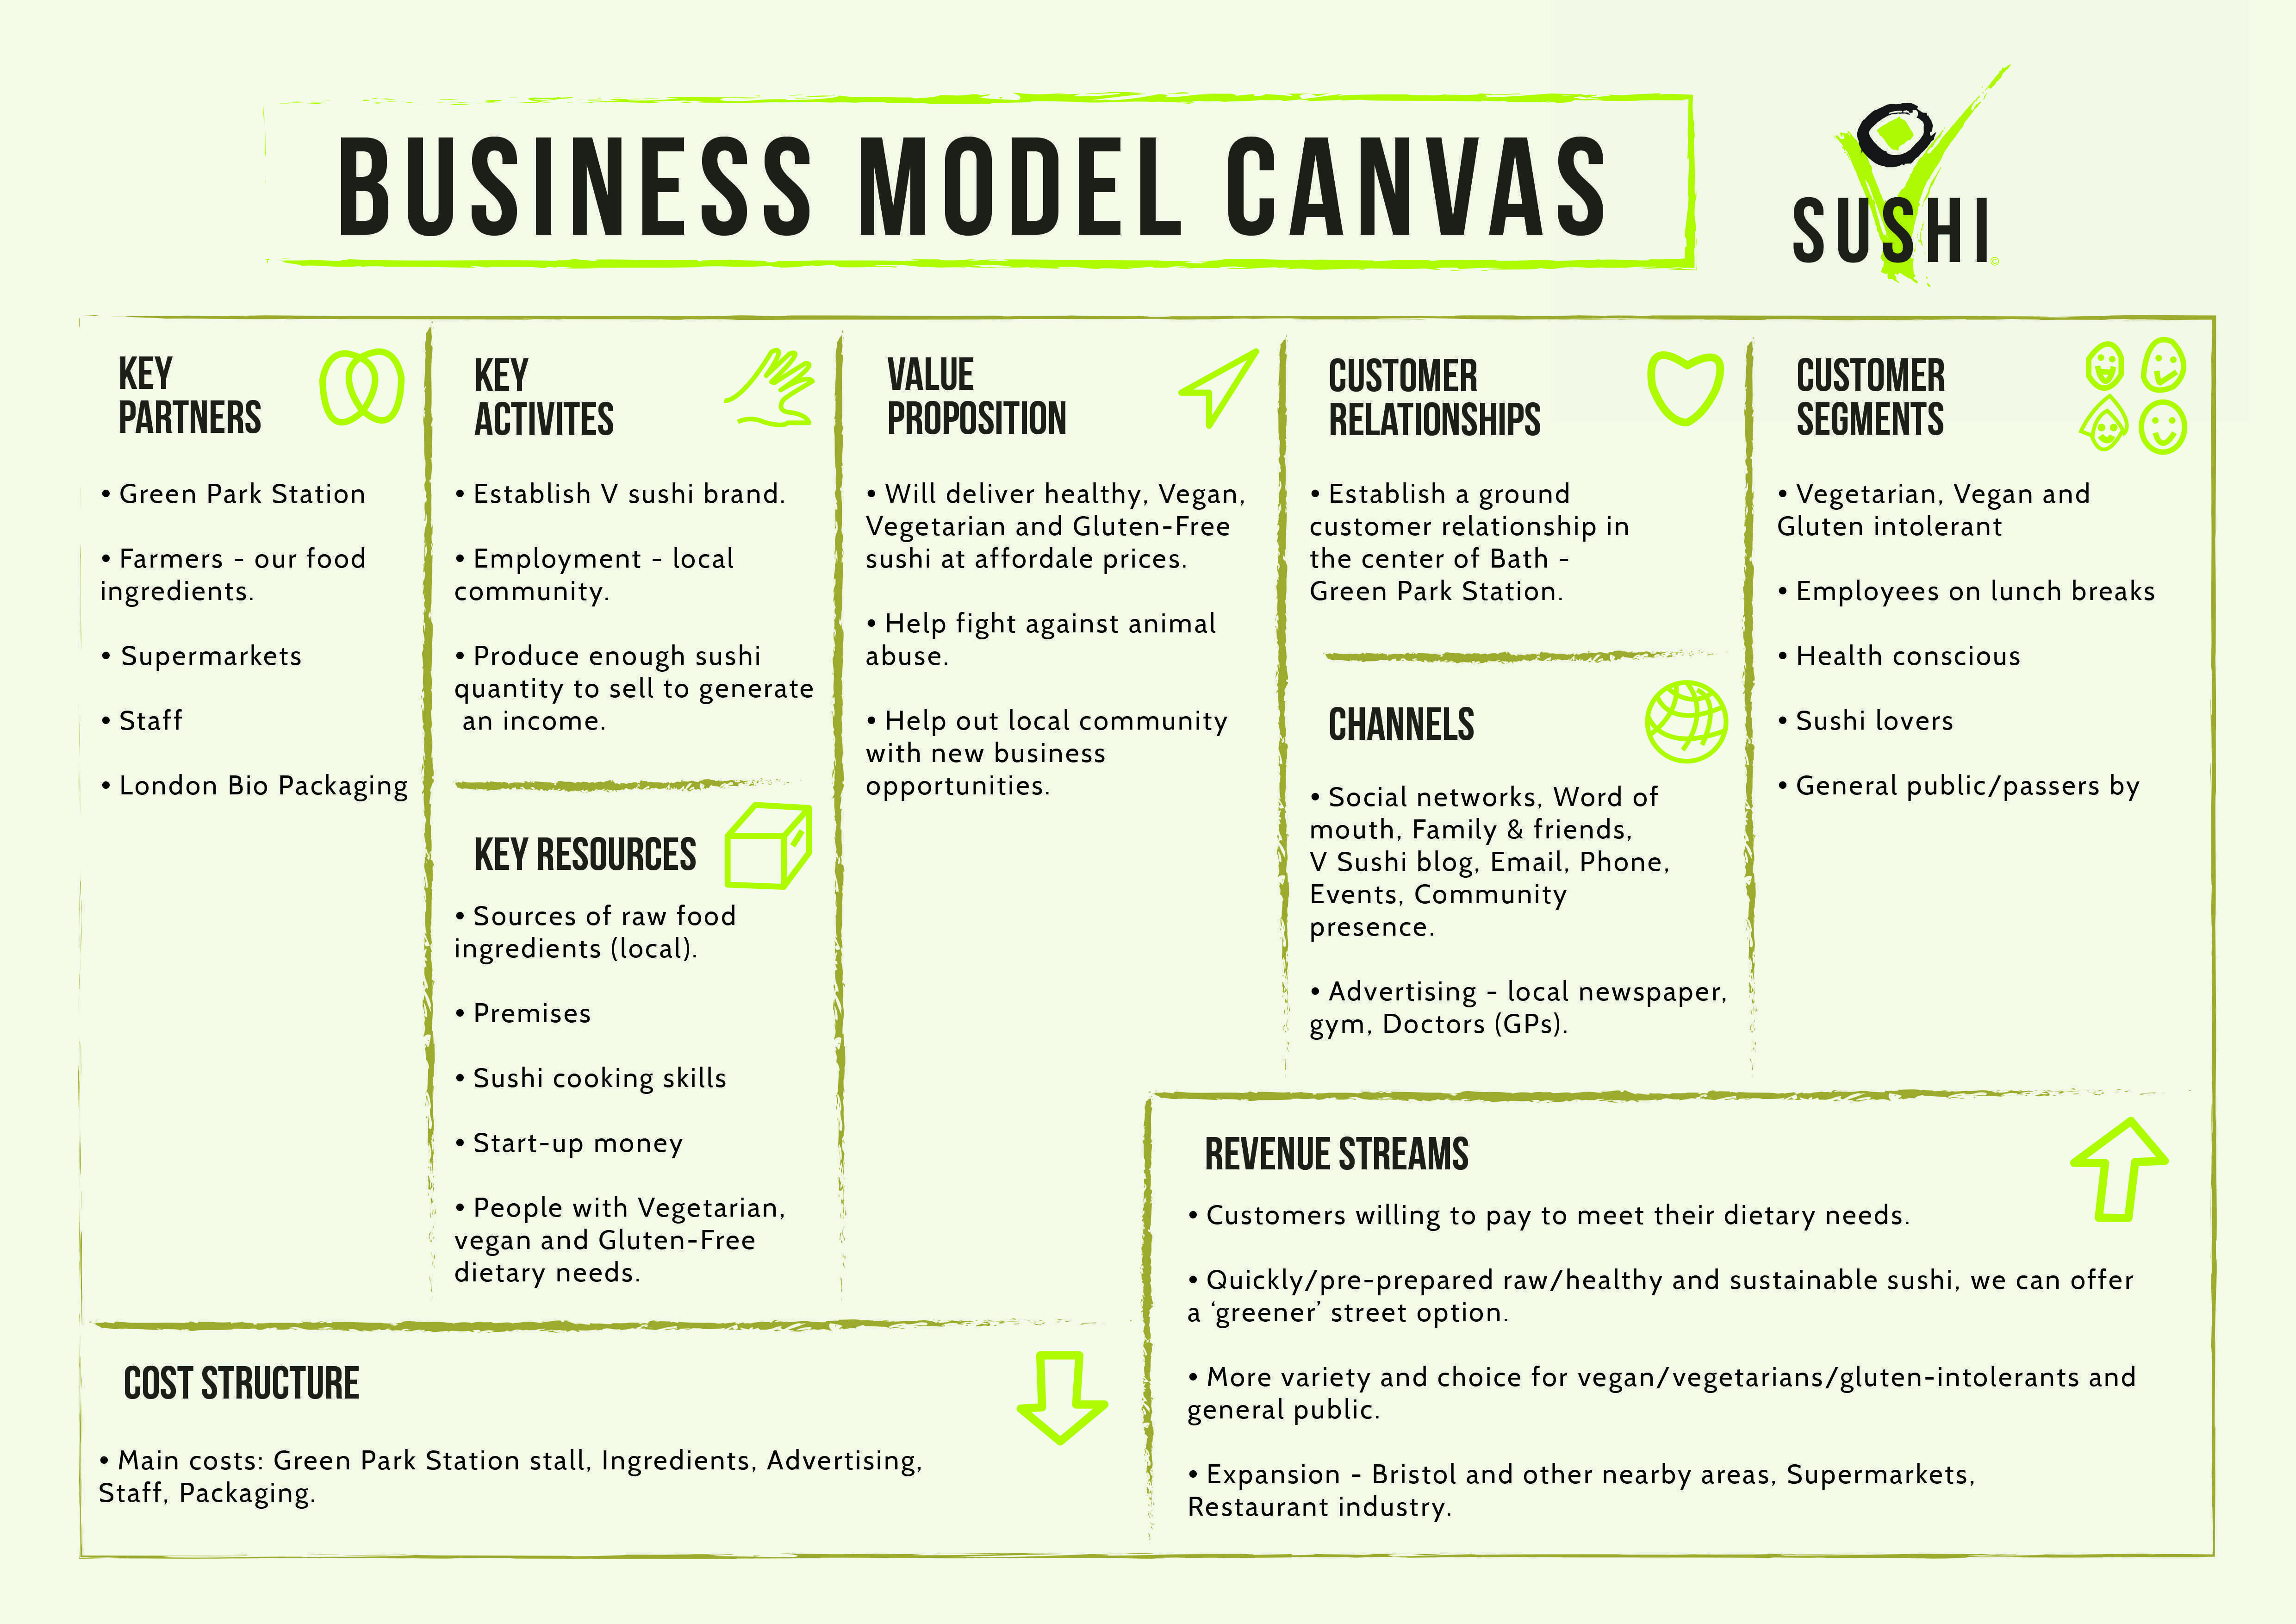 Business Model Canvas For Vegan Sushi Company Concept Business Model Canvas Examples Business Model Canvas Business Canvas